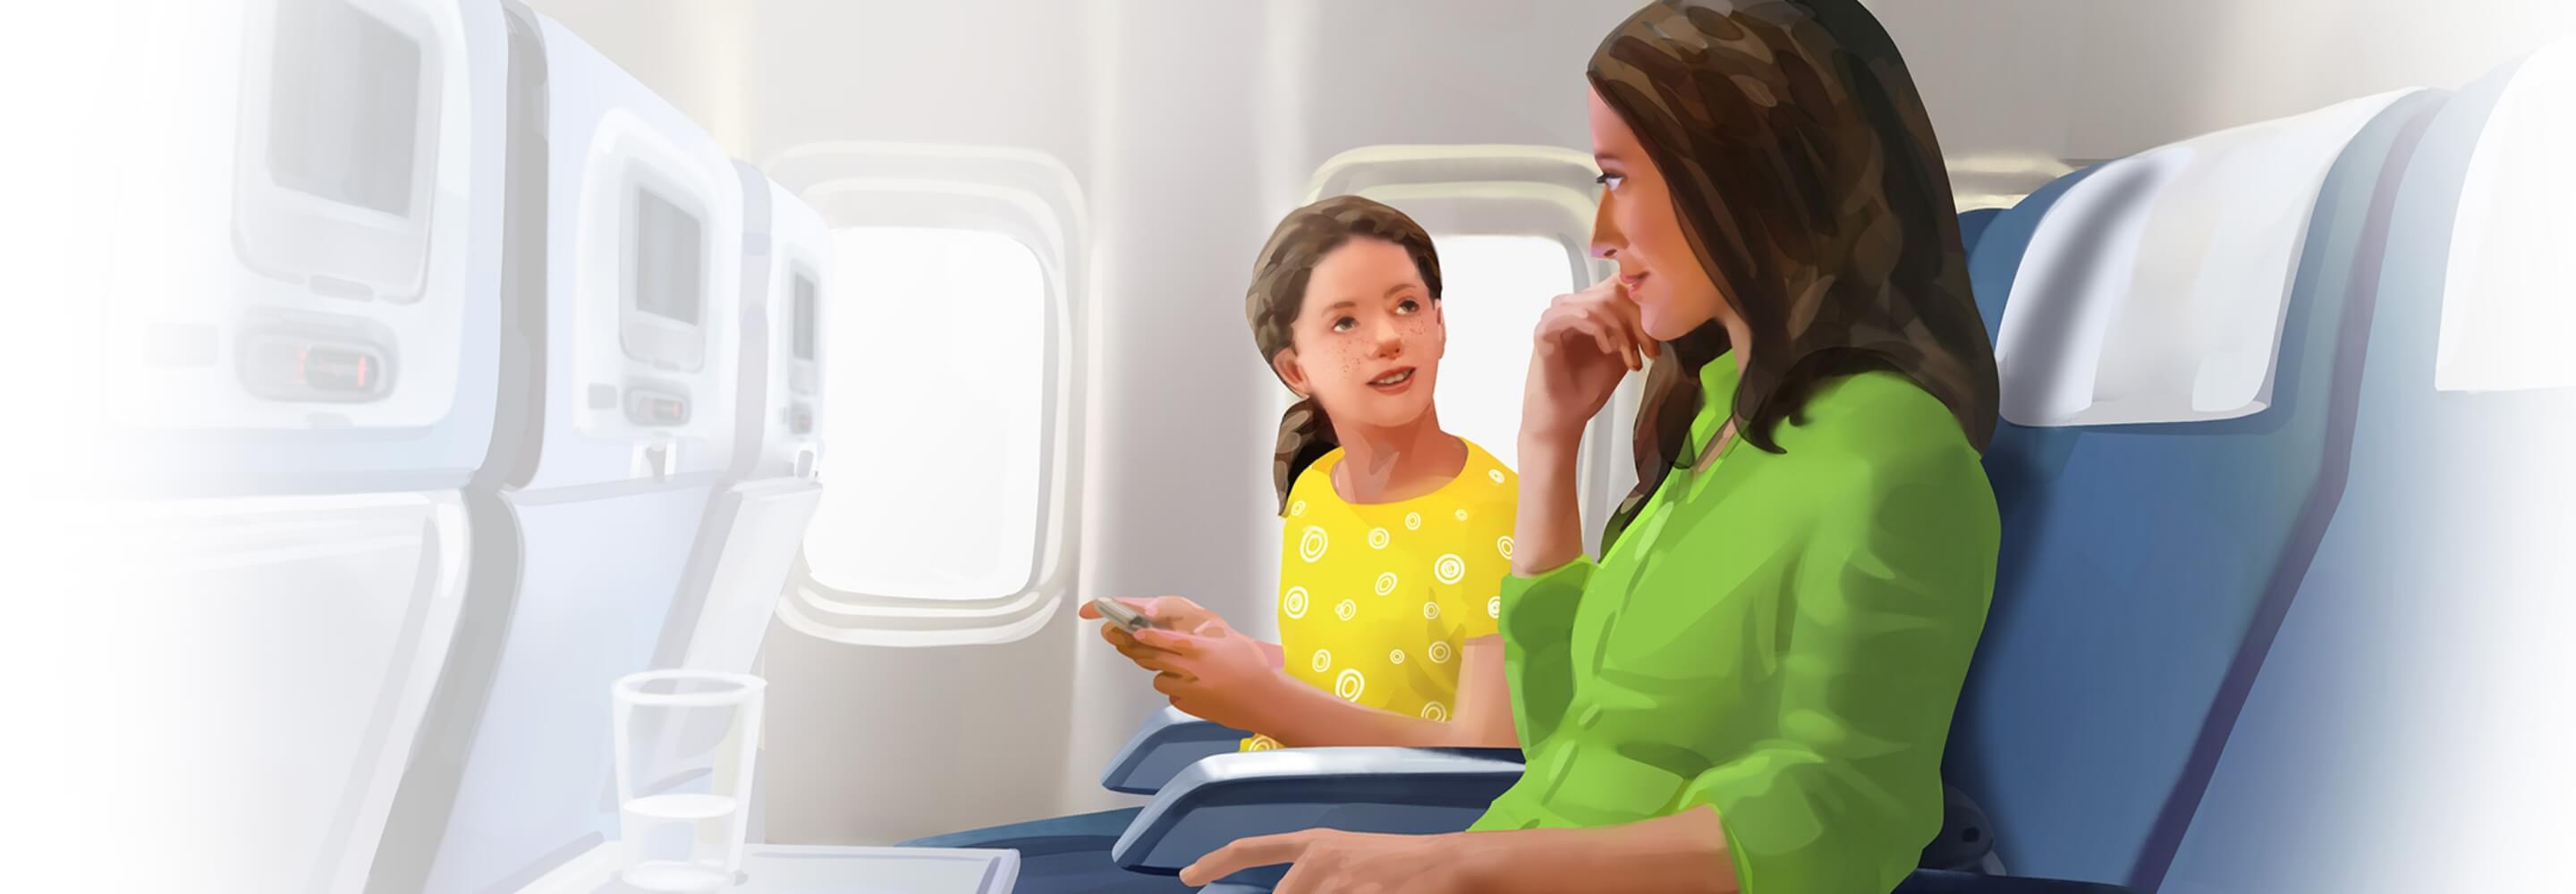 Woman and child talking in the plane